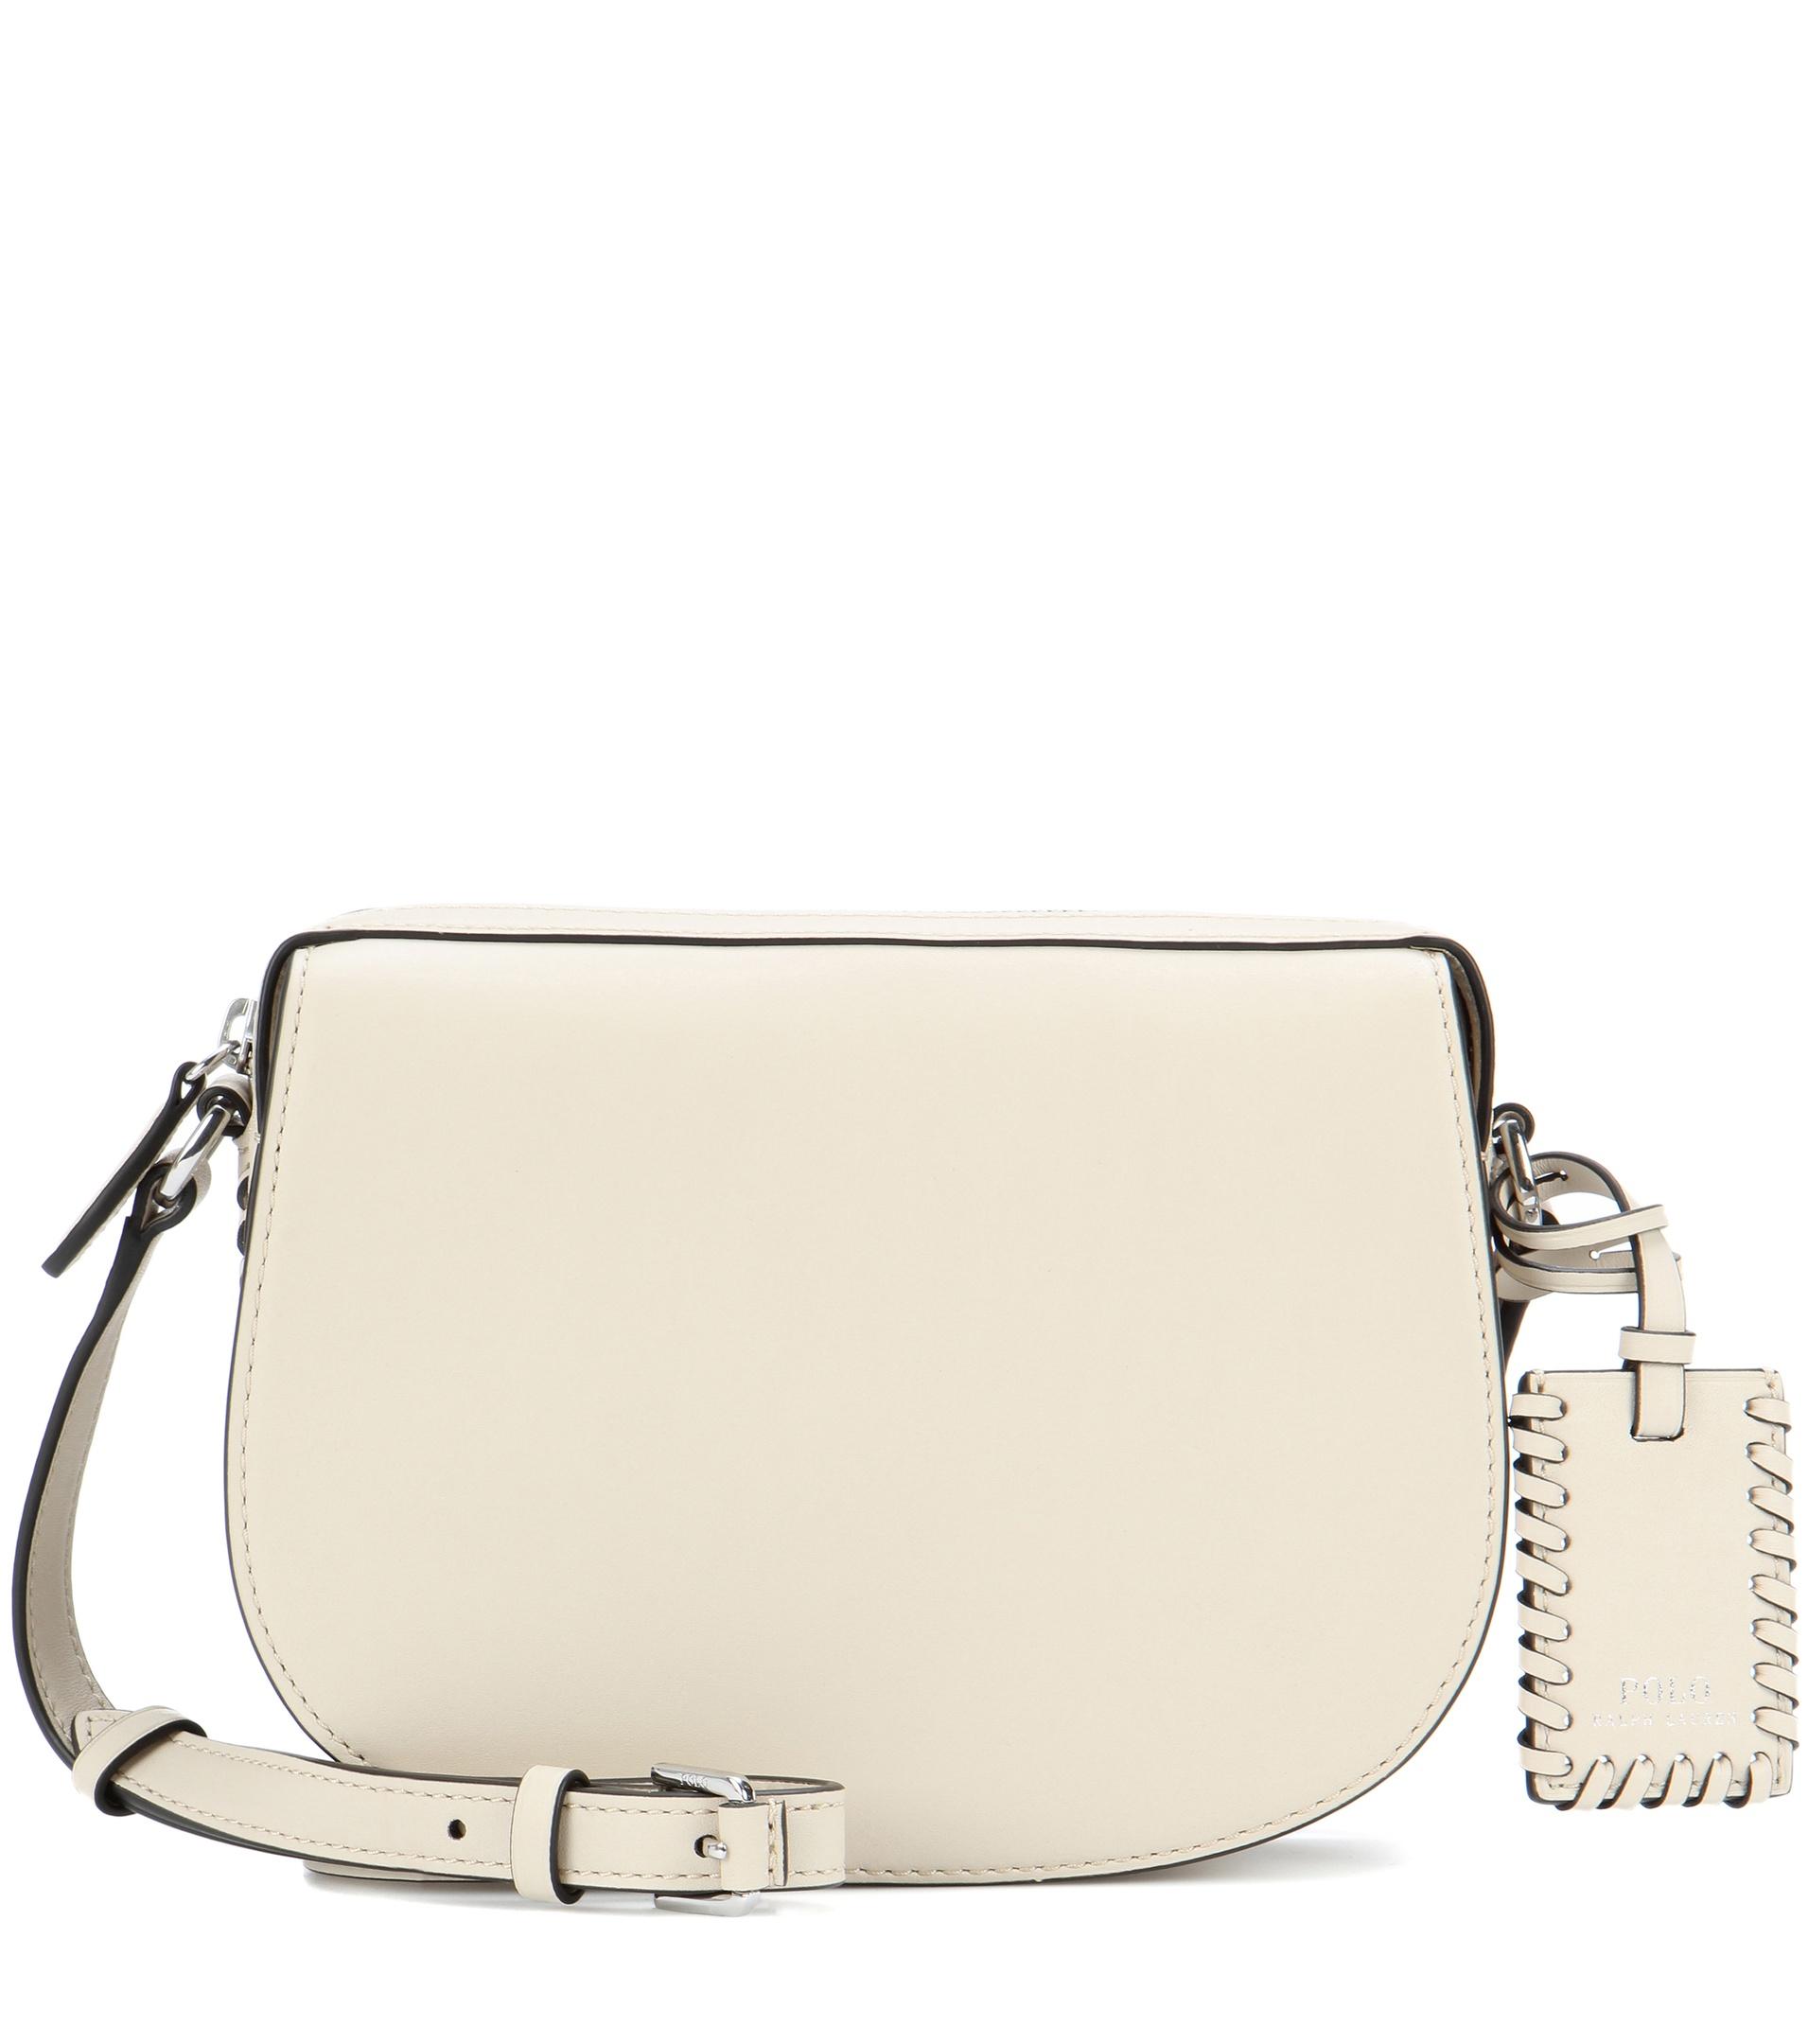 Lyst - Polo Ralph Lauren Saddle Leather Crossbody Bag in White